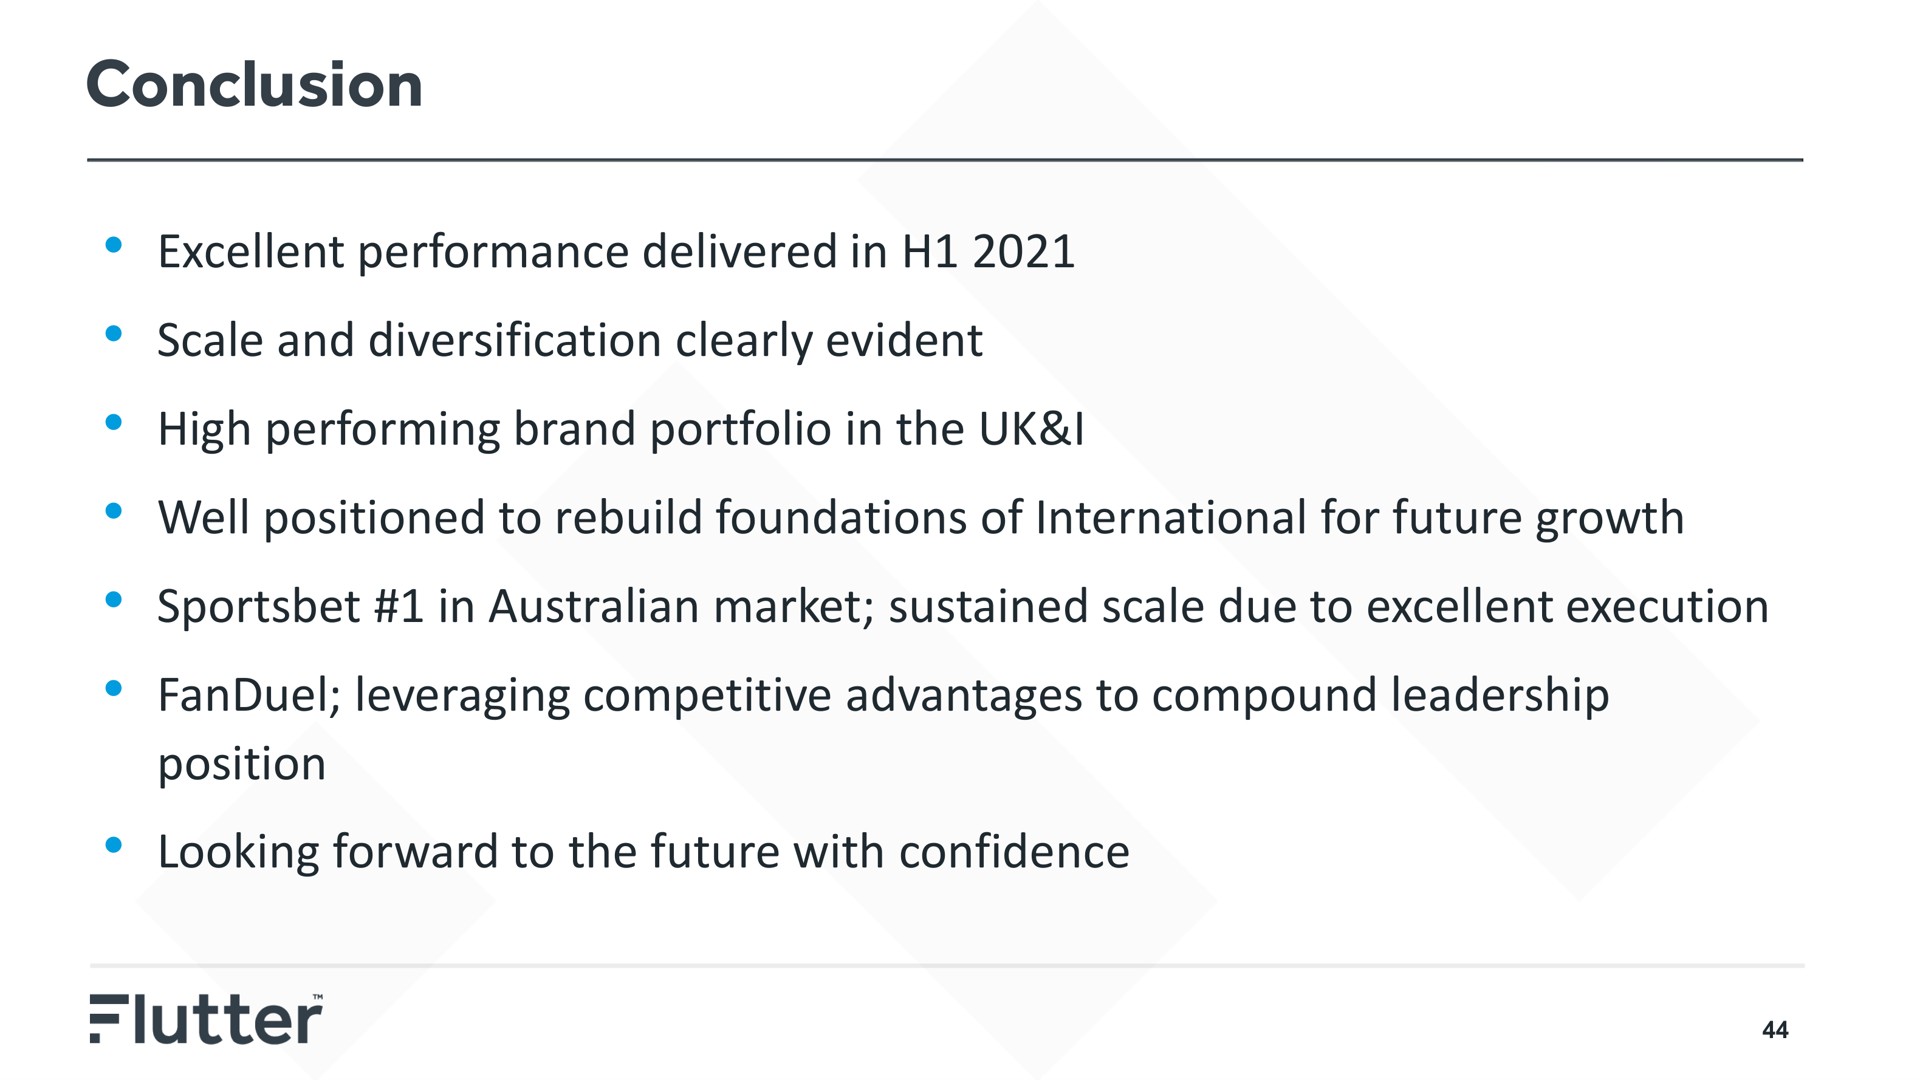 conclusion excellent performance delivered in scale and diversification clearly evident high performing brand portfolio in the i well positioned to rebuild foundations of international for future growth in market sustained scale due to excellent execution leveraging competitive advantages to compound leadership position looking forward to the future with confidence a | Flutter